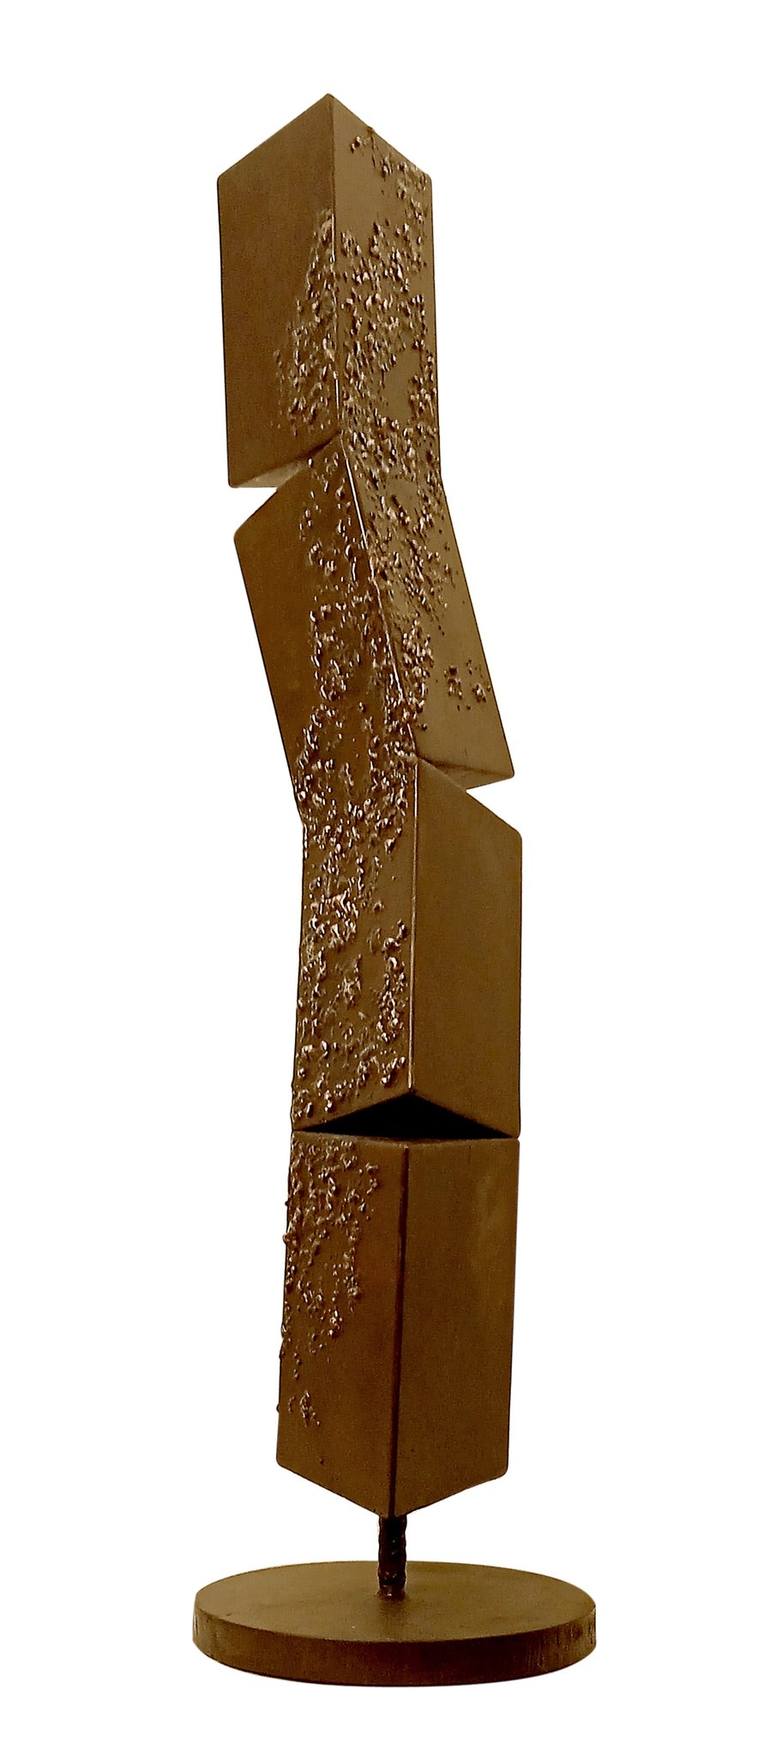 Original Contemporary Abstract Sculpture by PAVLOVSKYDESIGN metal and paintings